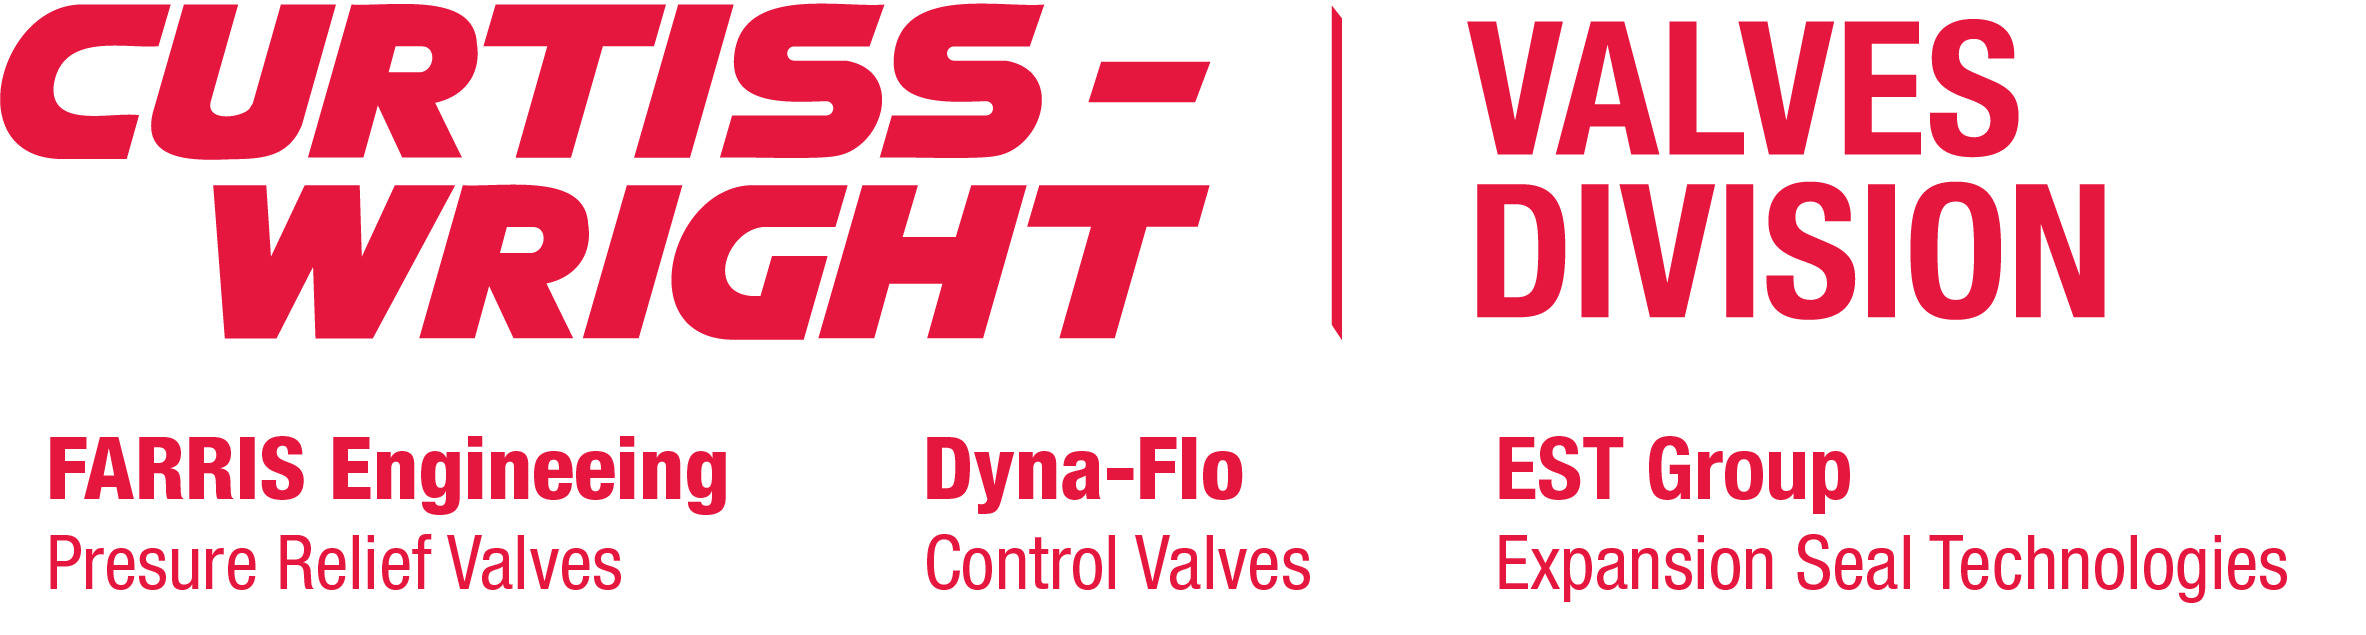 Curtiss-Wright Valves Division (UK)